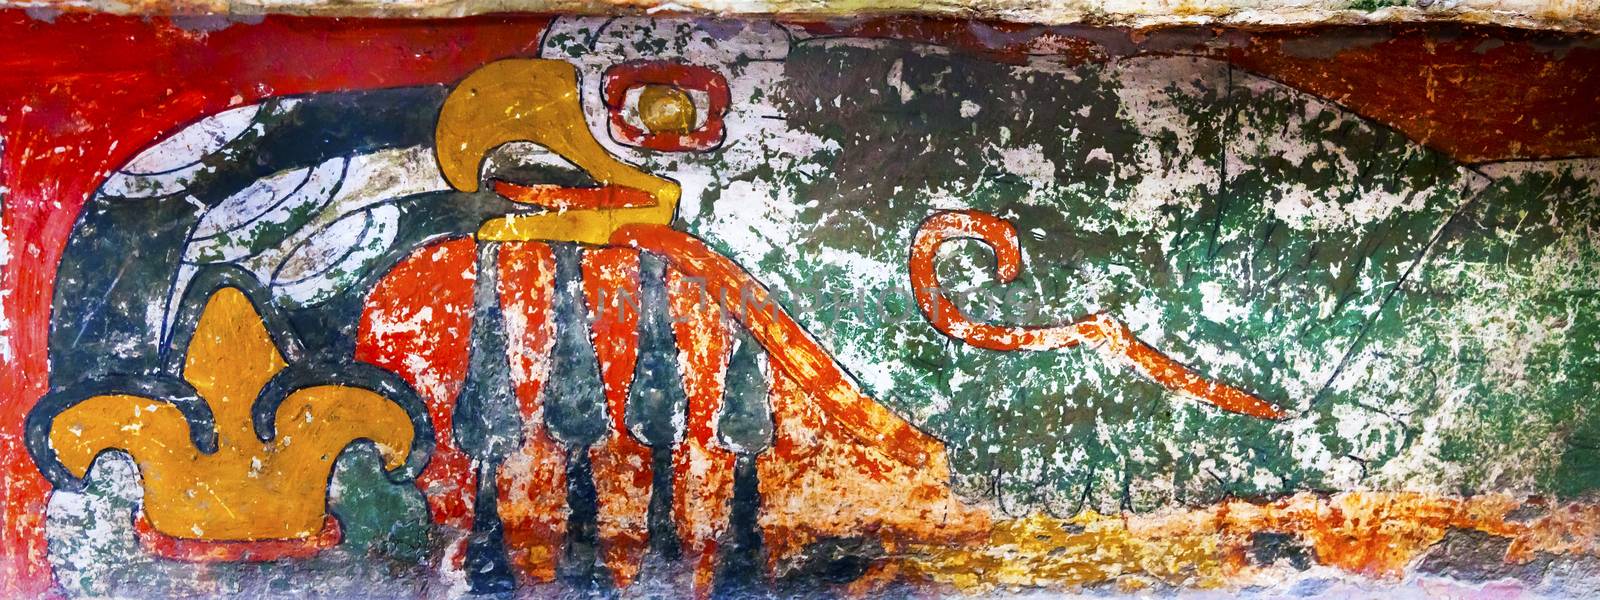 Ancient Bird Painting Mural Wall Indian Ruins Teotihuacan Mexico by bill_perry